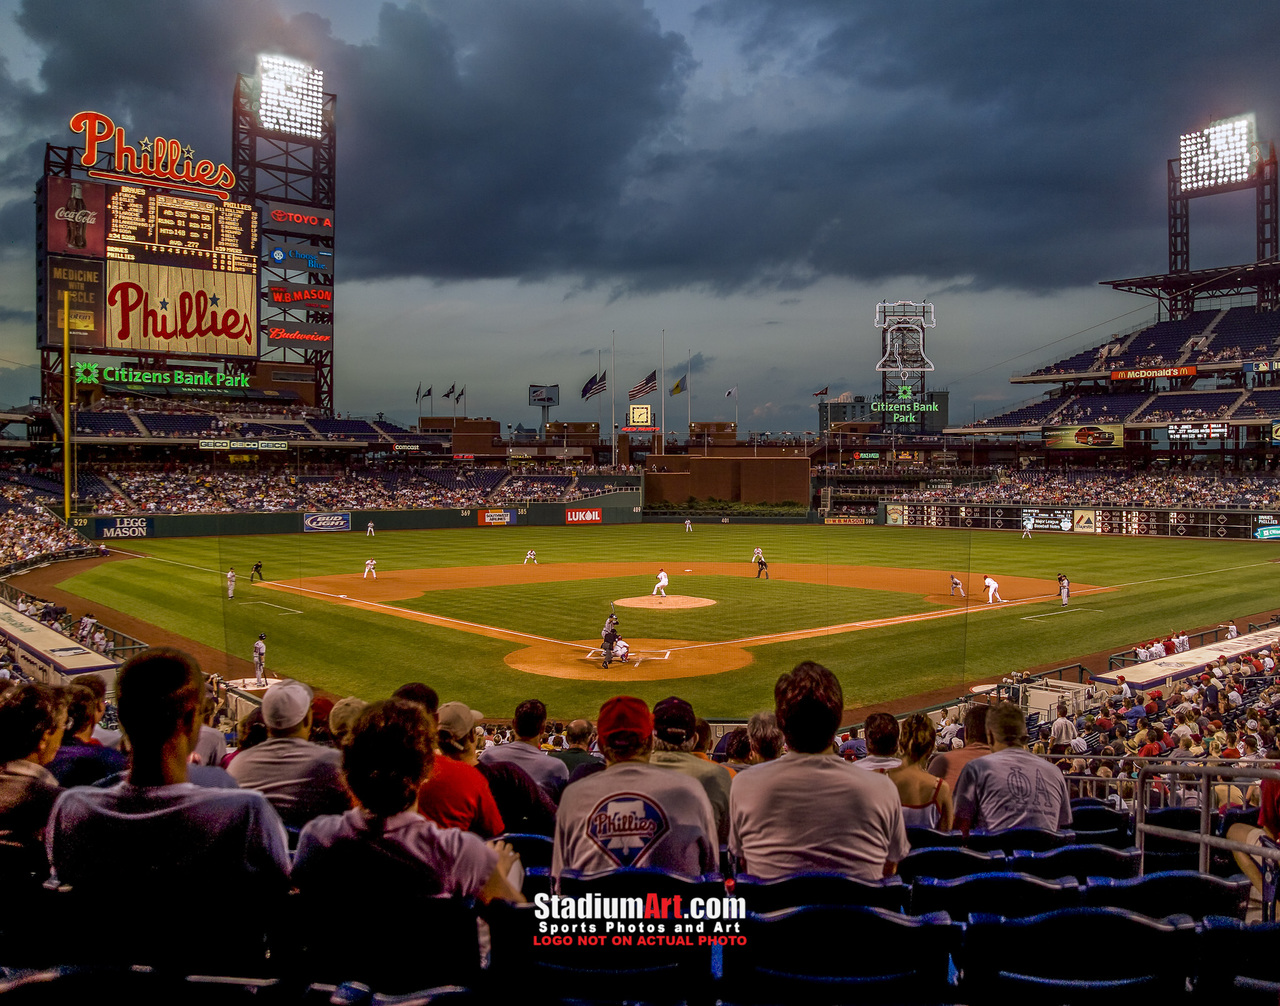 Citizens Bank Park: 10 Years Later